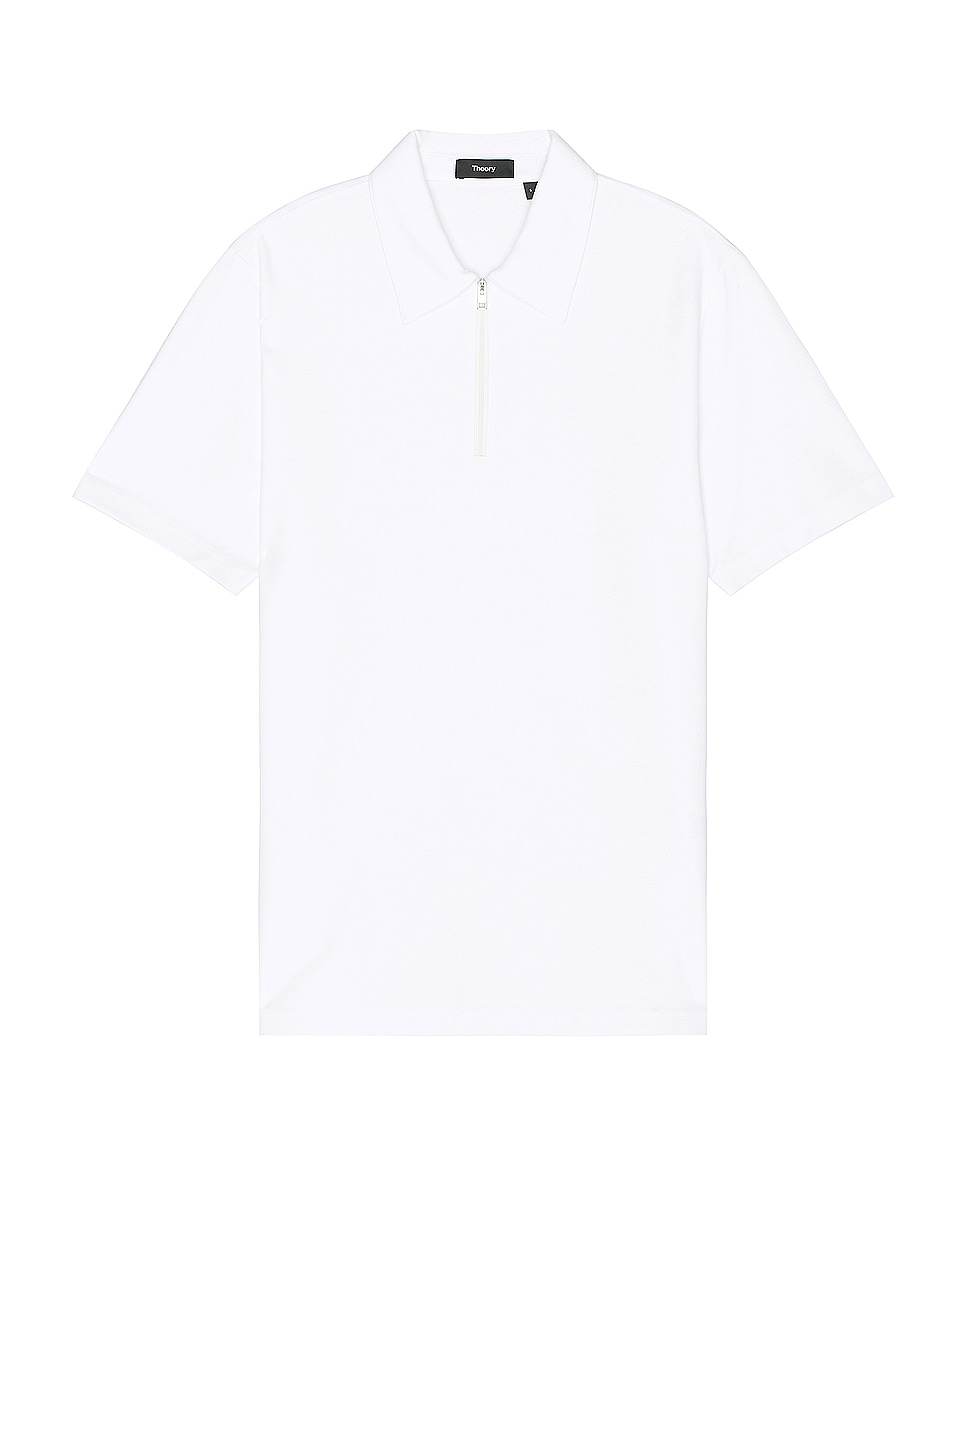 Image 1 of Theory Ryder Quarter Zip Polo in White